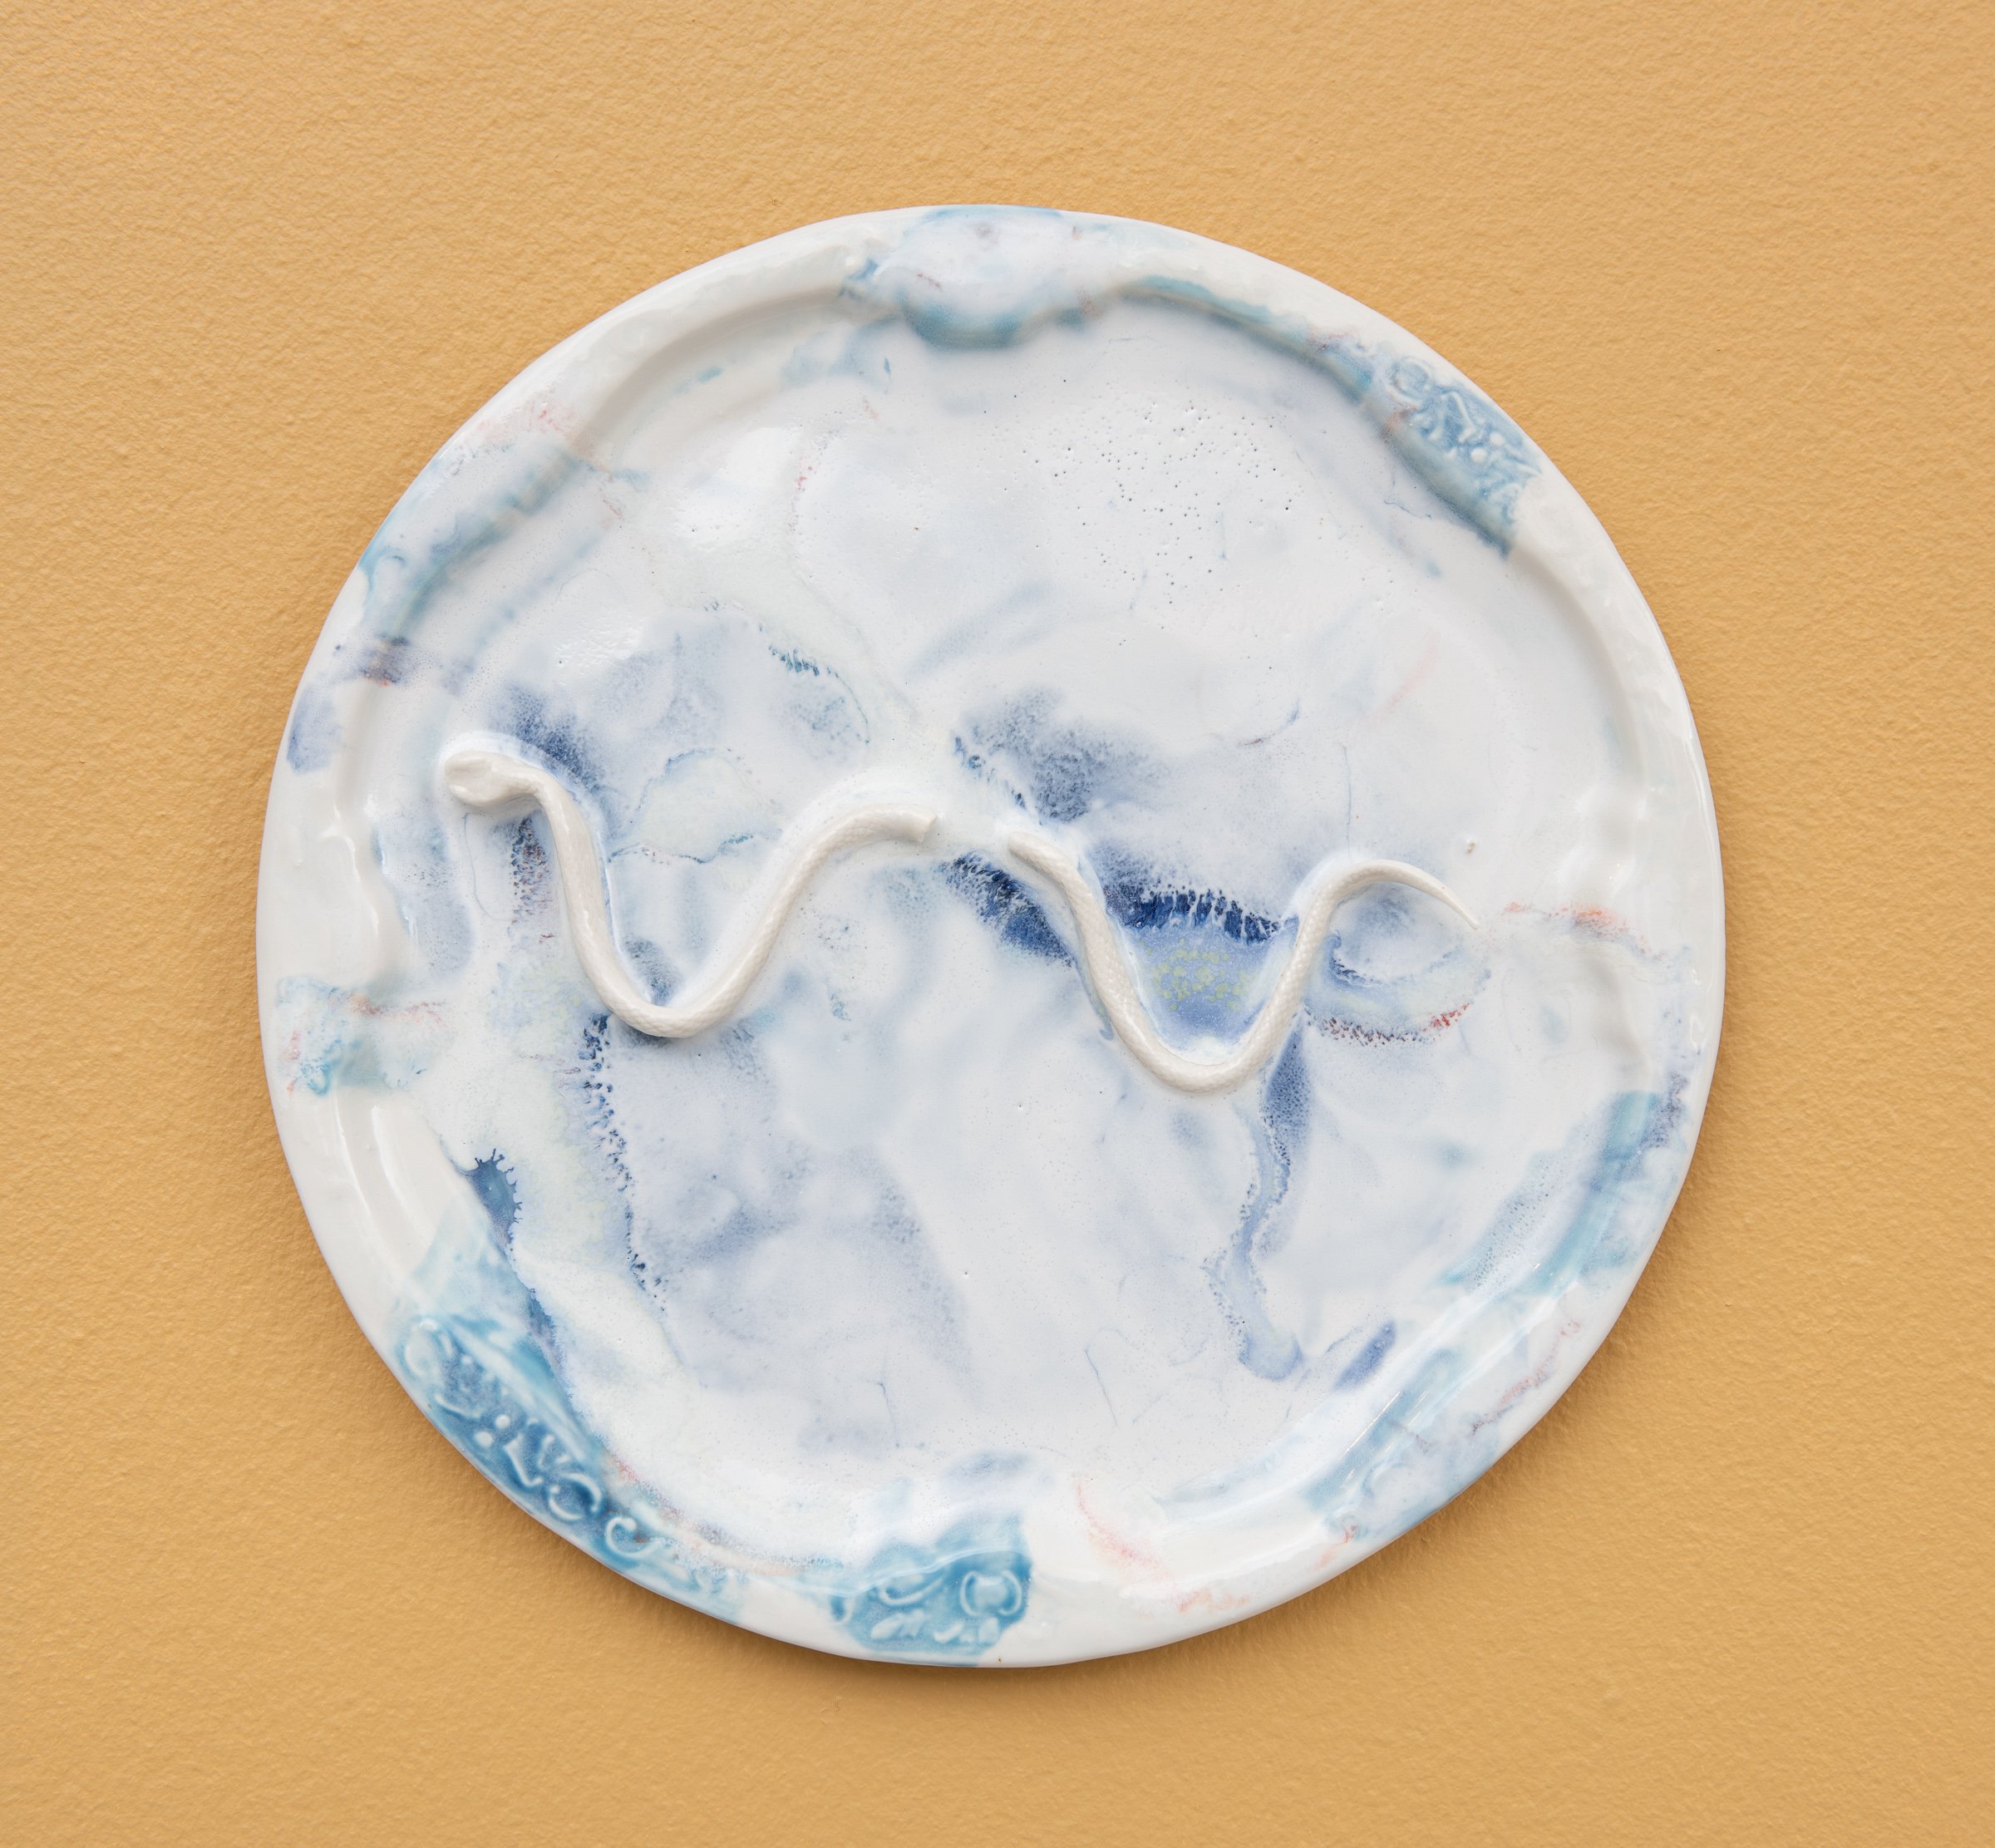  Why do Europeans put plates on their walls? X | 2022  Porcelain, glazes, porcelain decals and tissue paper, press molding. 27x27x3cm  Photo: Thomas Tveter 